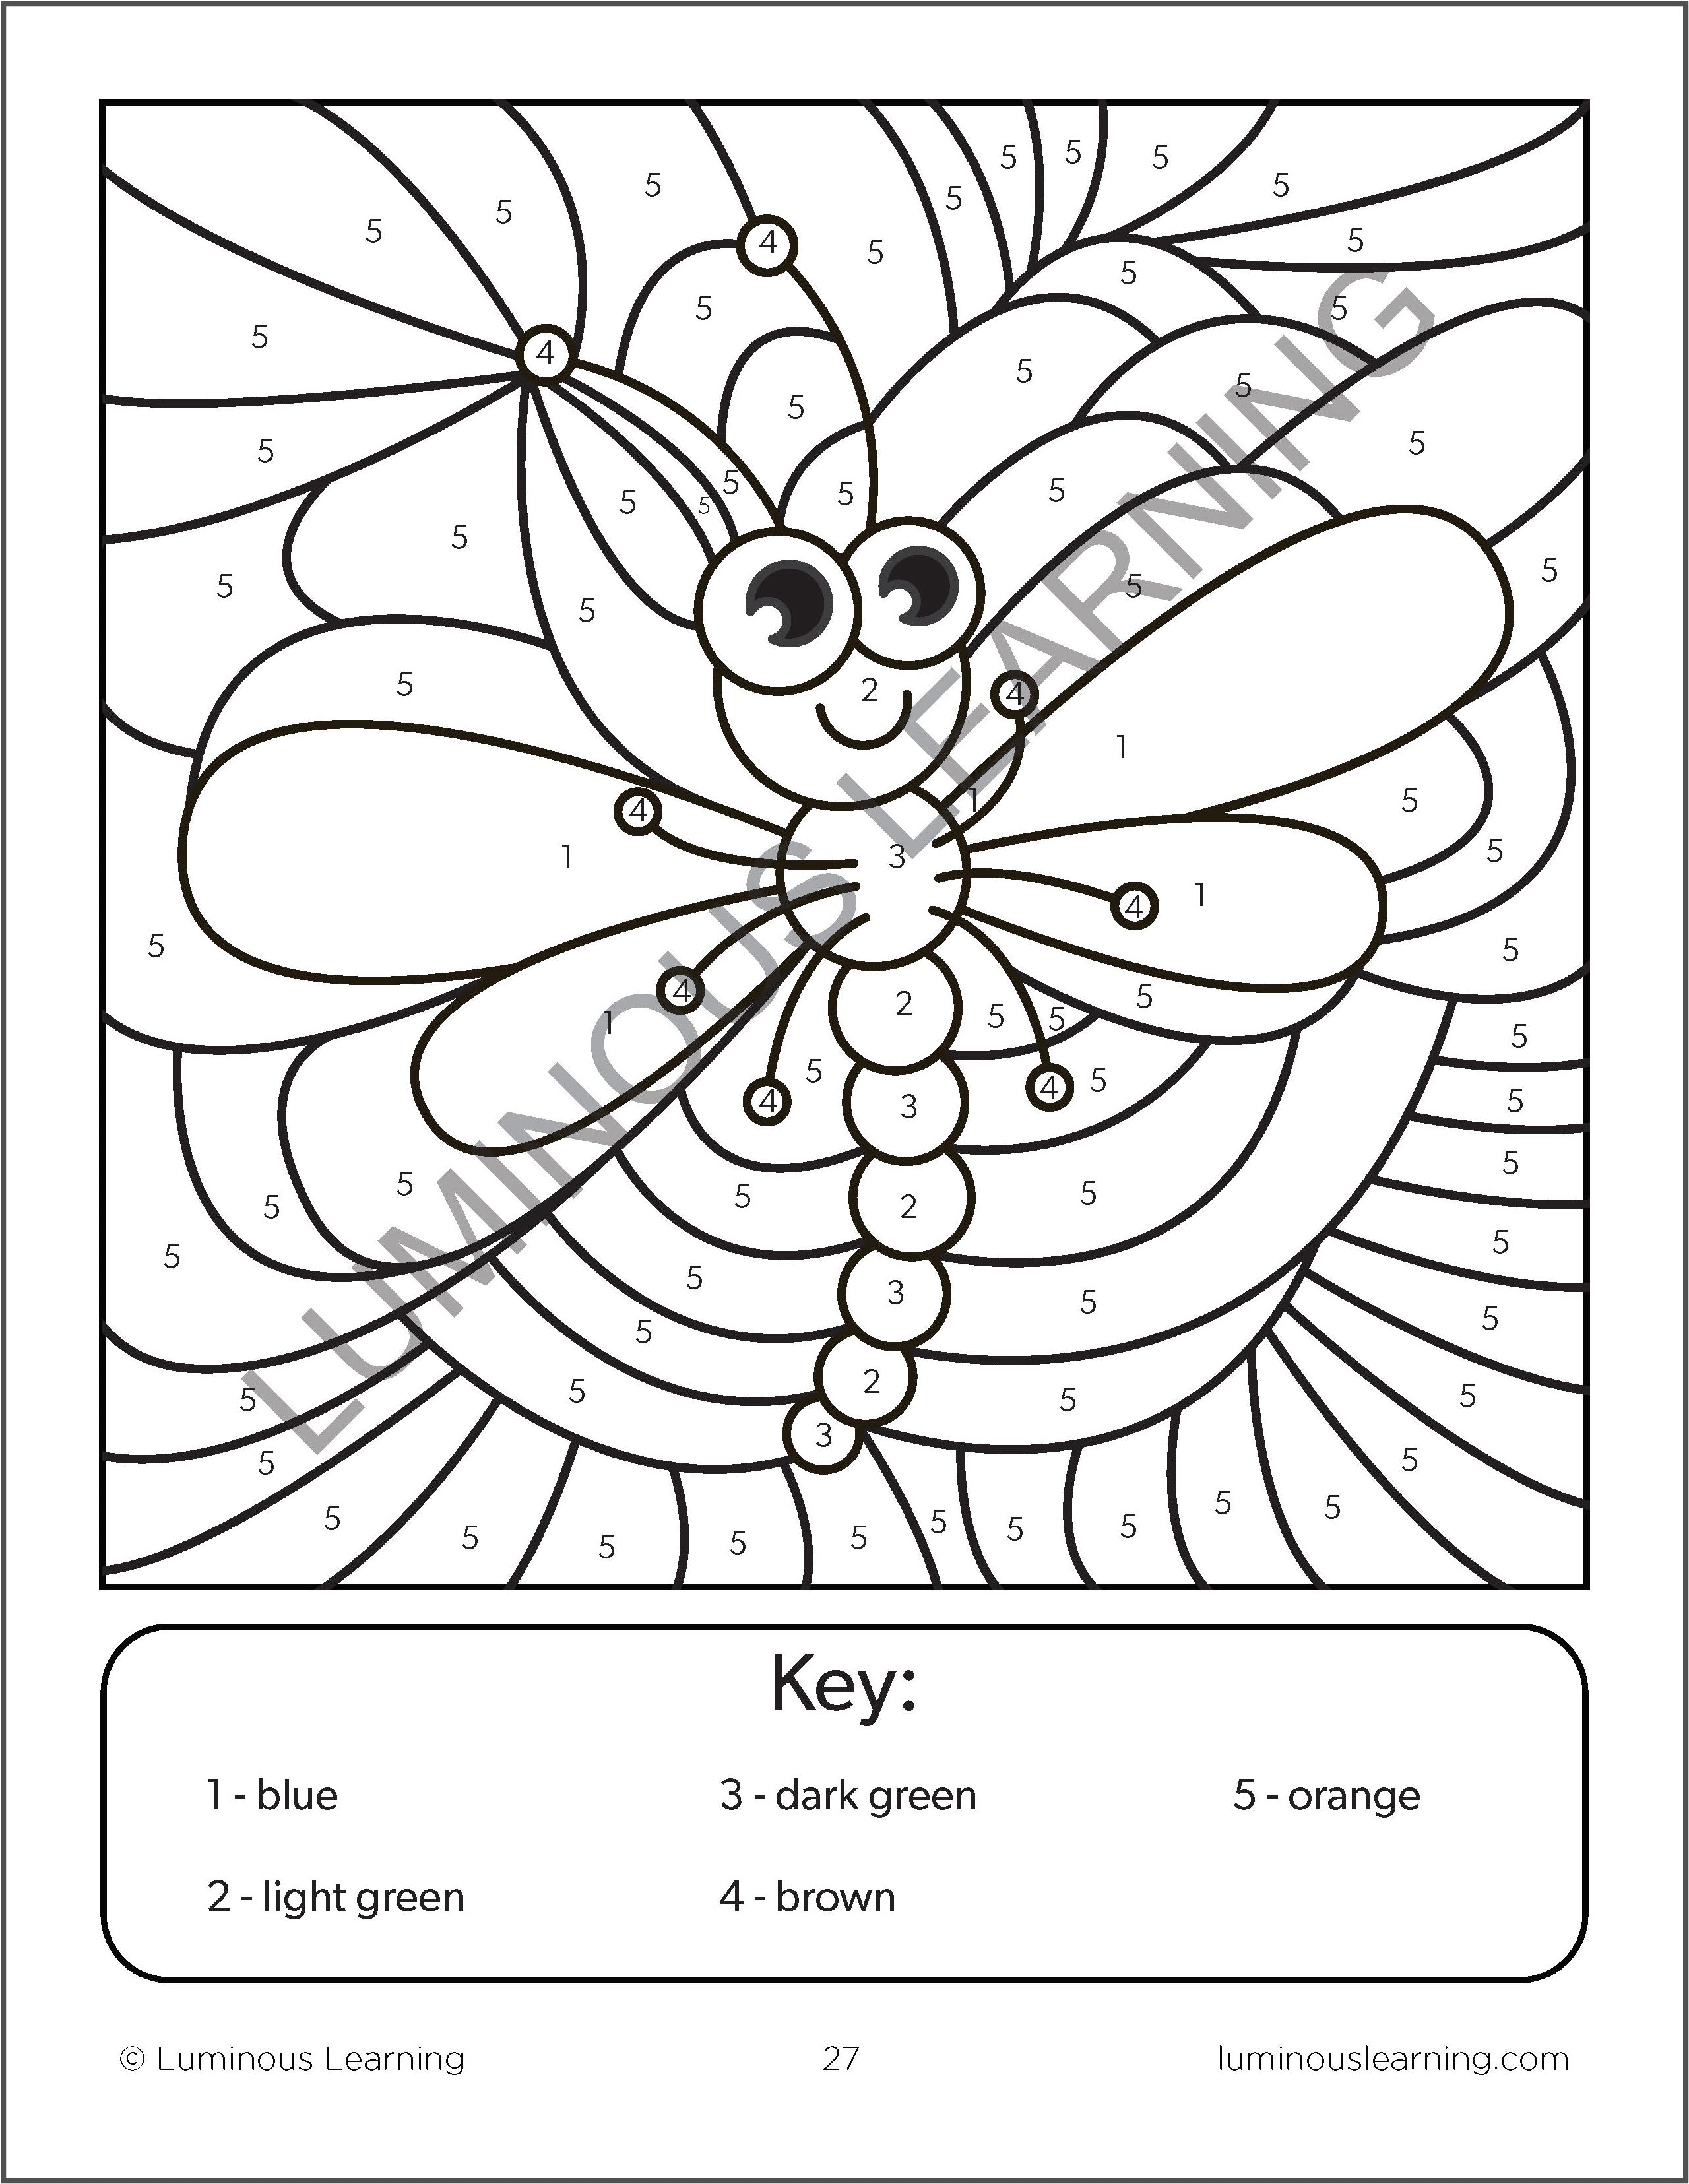 color-by-numbers-bugs-math-activity-book-for-kids